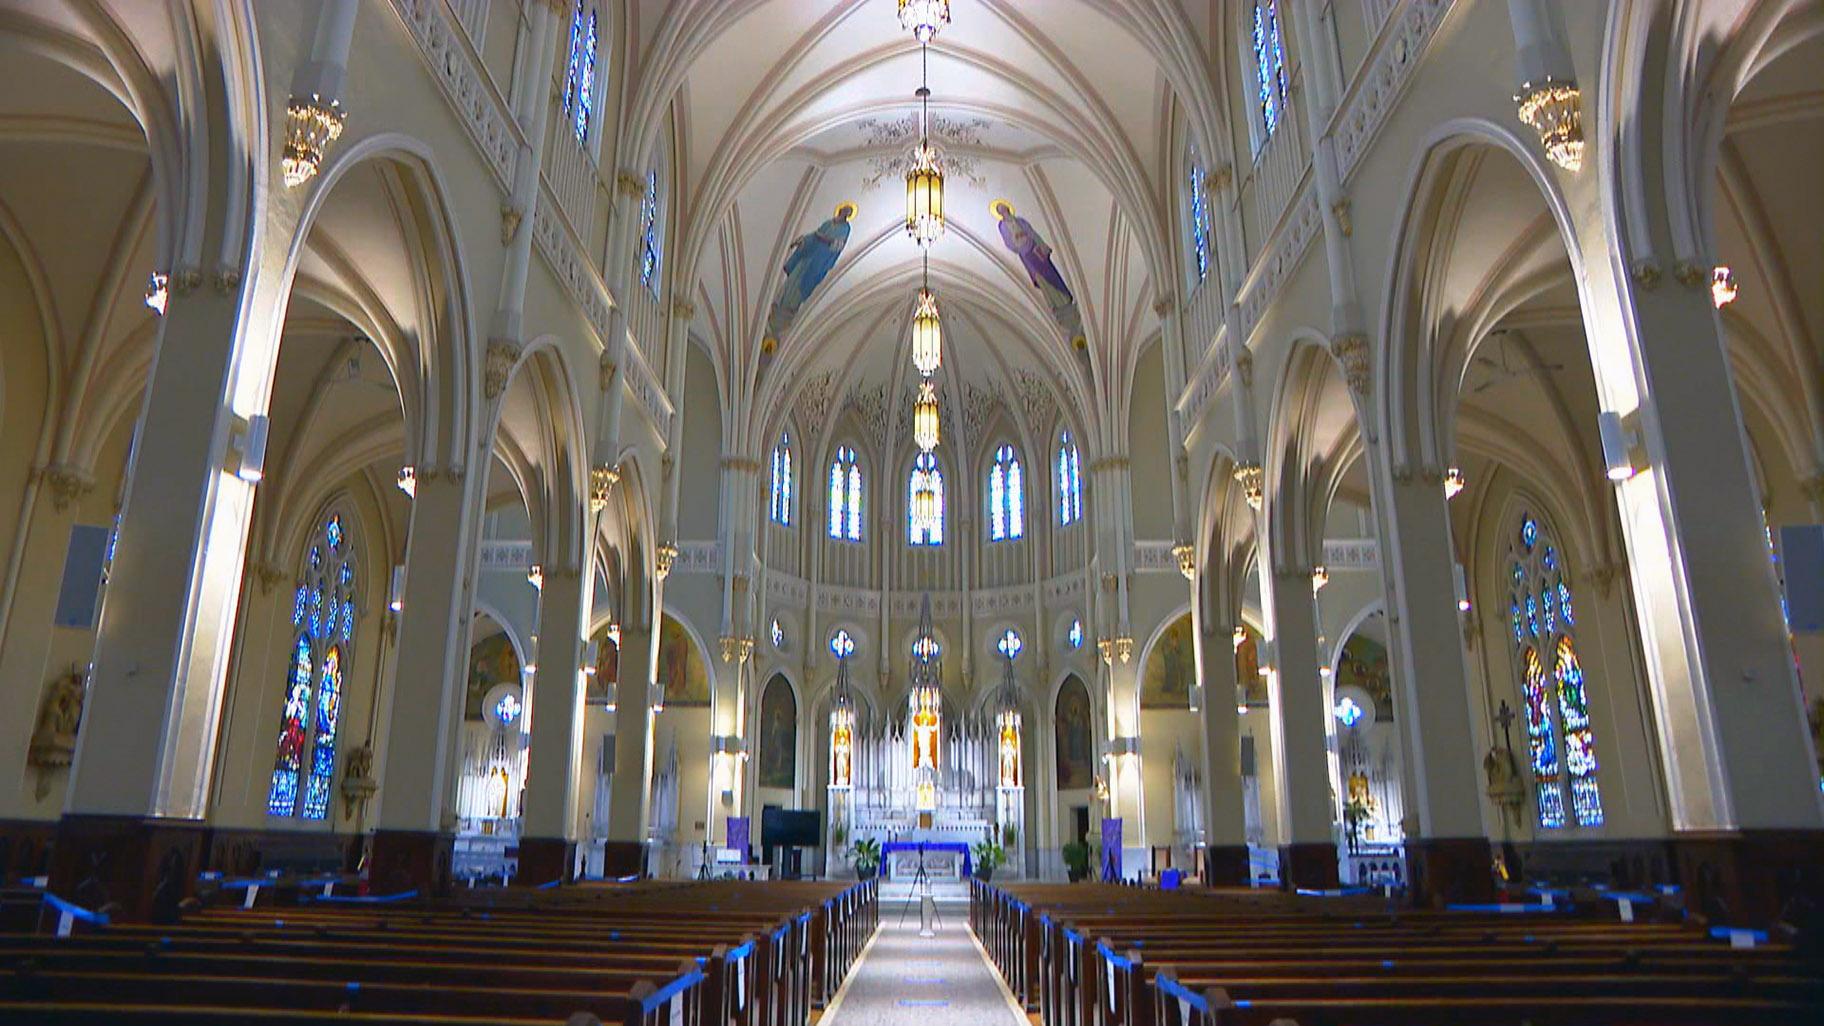 St. Columbanus Catholic Church is offering a hybrid option for parishioners this Holy Week and Easter. (WTTW News)